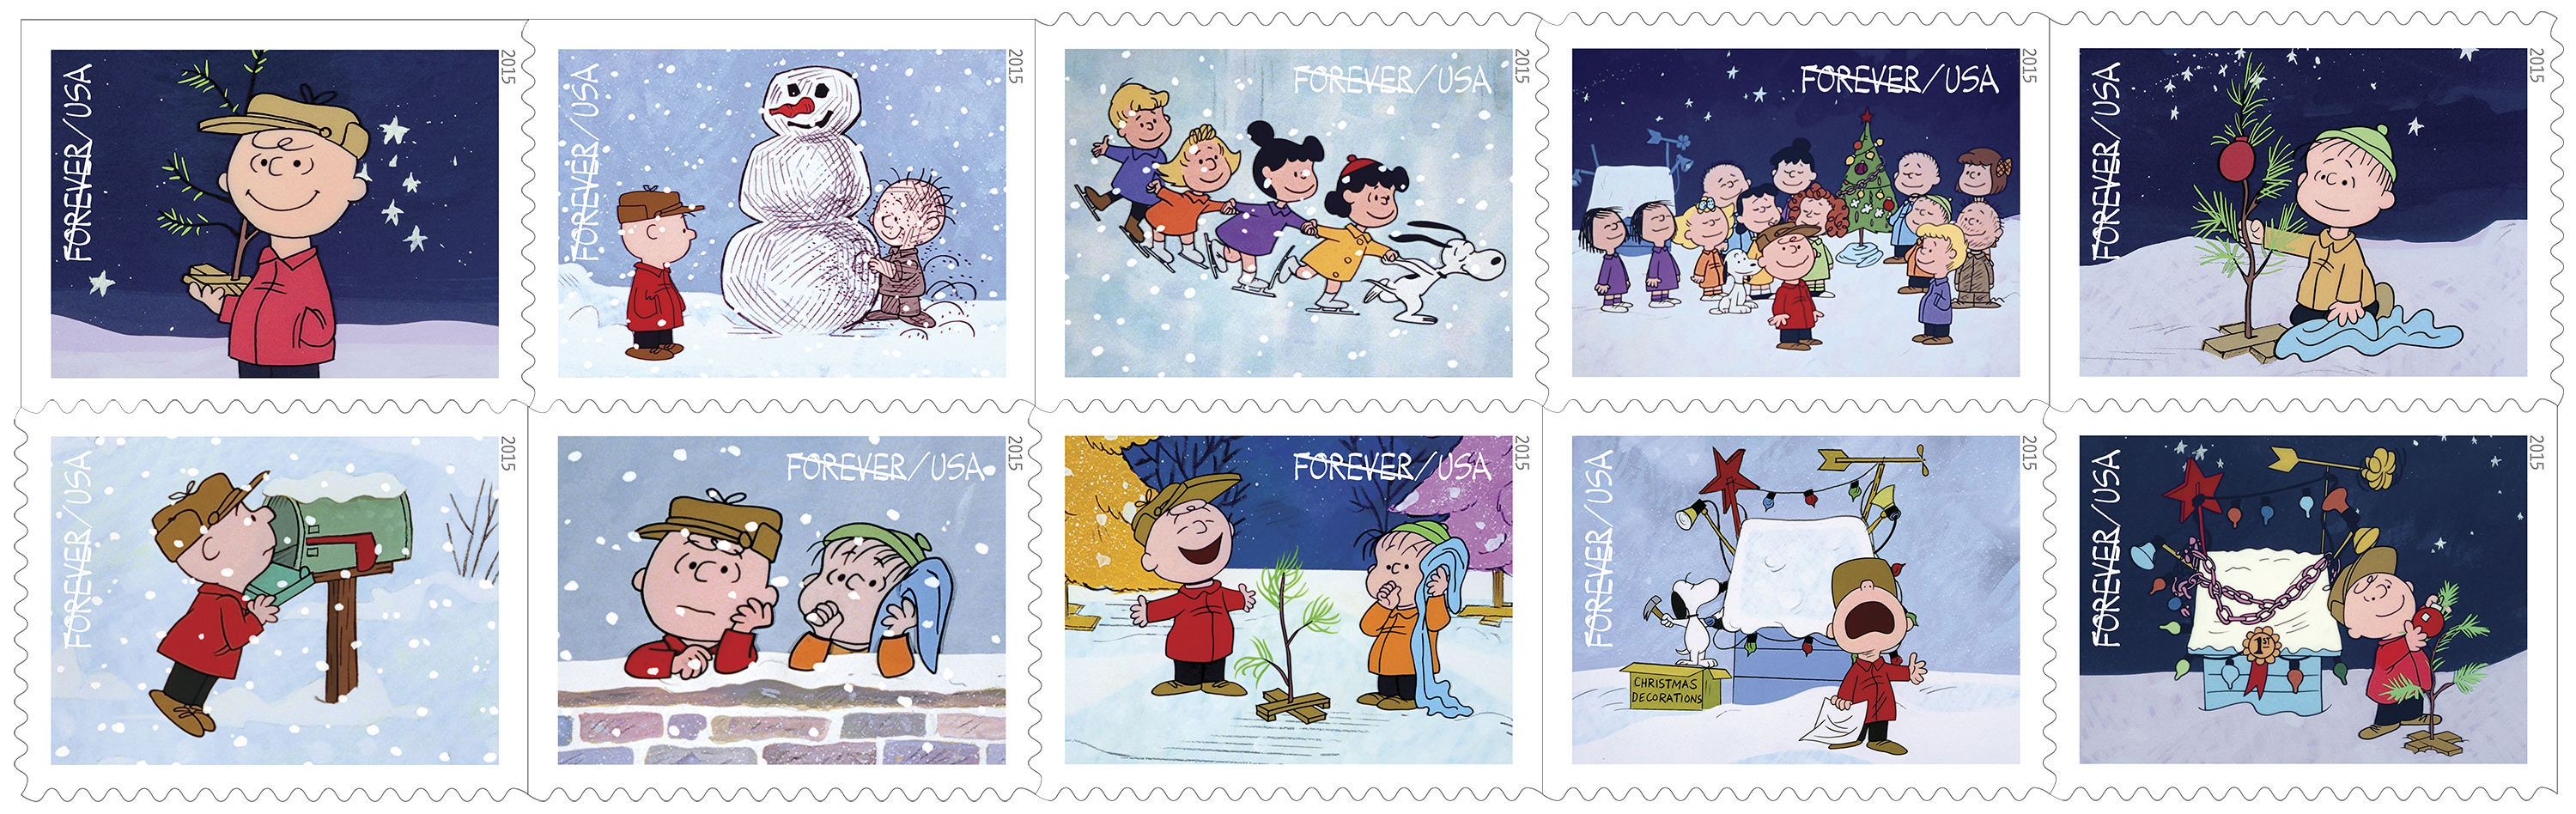 The new Charlie Brown Christmas Forever stamps. (Image credit U.S. Postal Service)